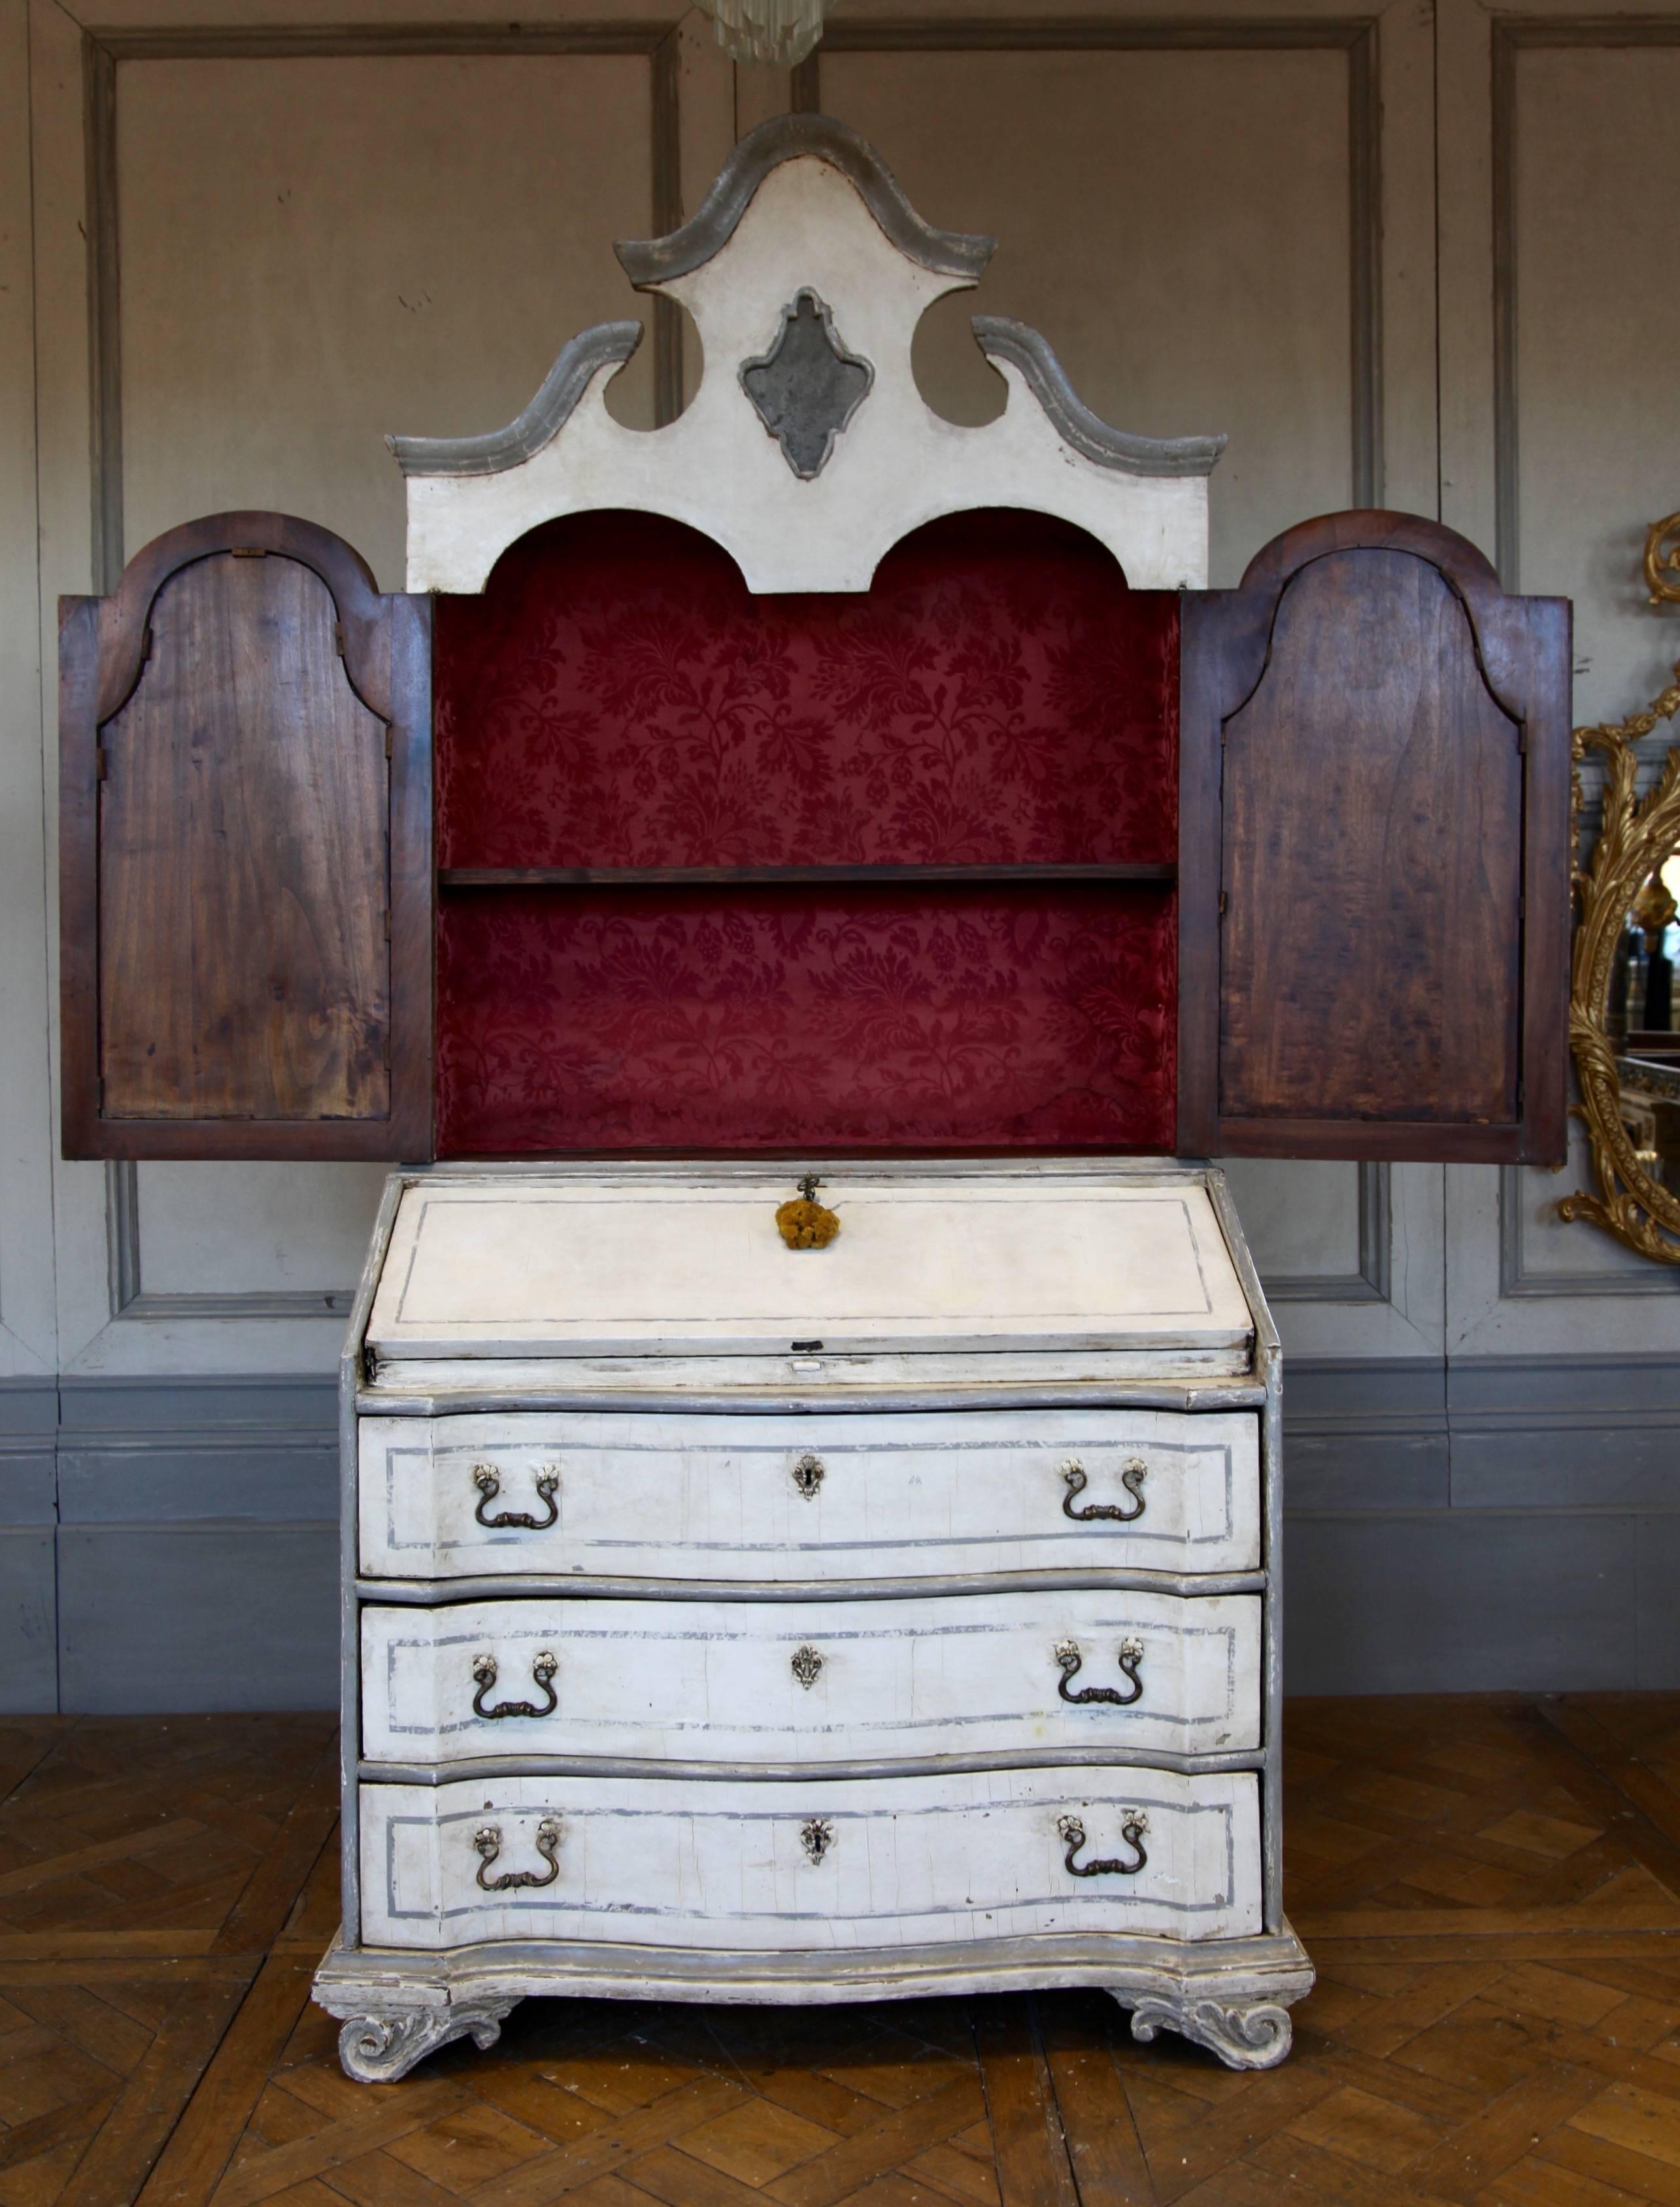 18th century, Rococo period, Italian Scriban. Painted in two-tone finish with aged patina. Interior lined with claret red damask. Comprise of a chest with three drawers, the top of the chest opens into a writing desk and the top cabinet has one